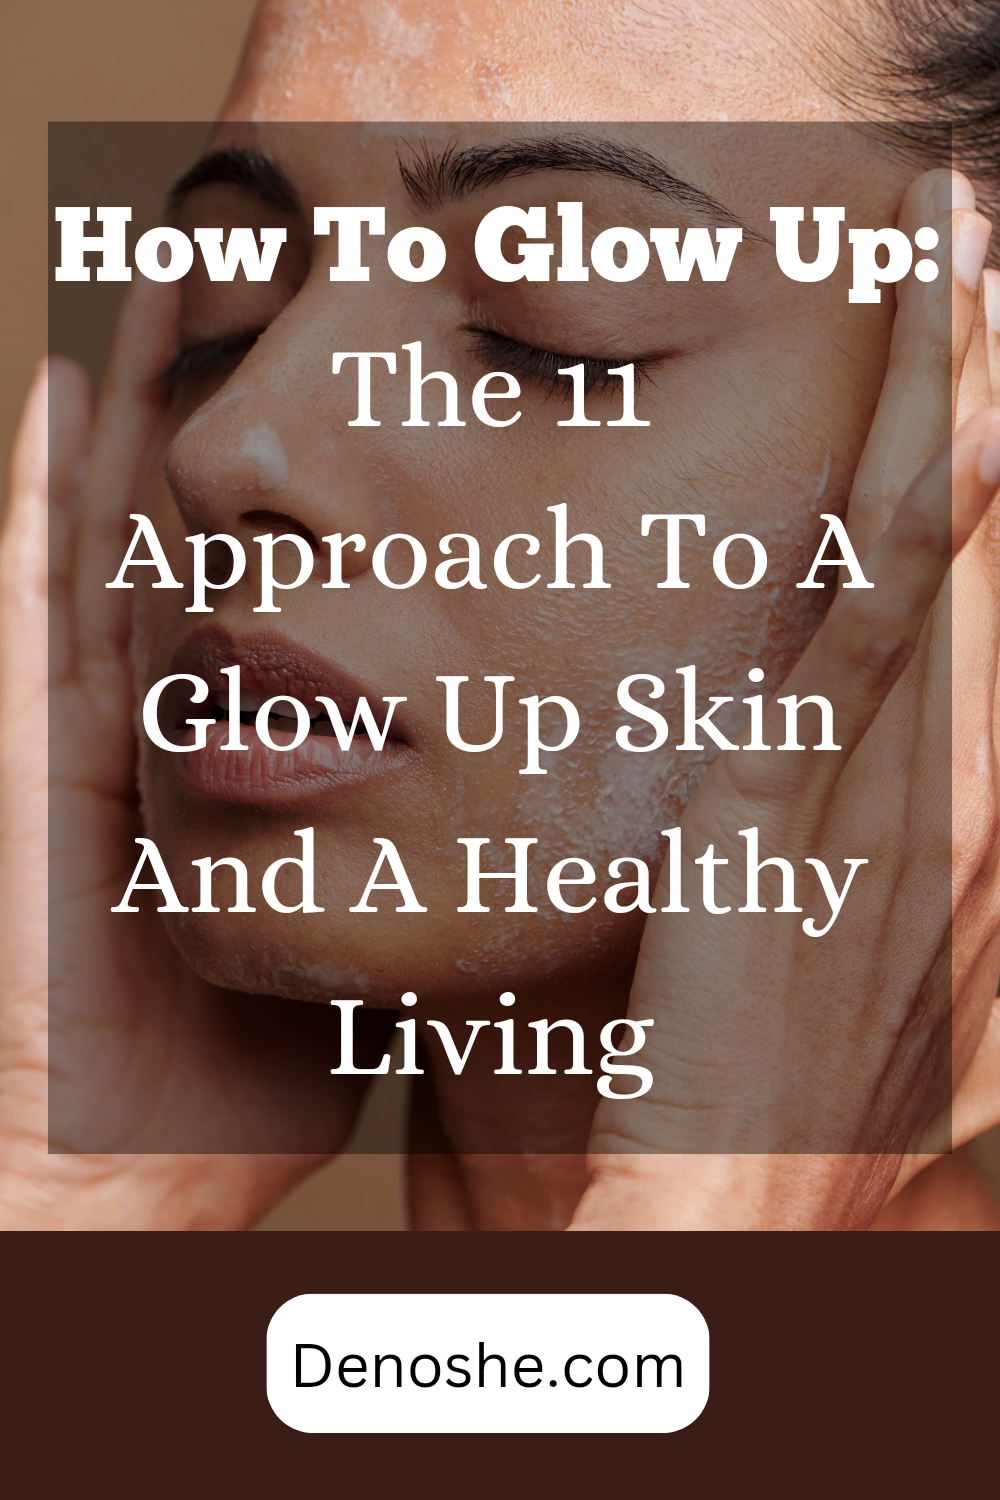  For Later: How To Glow Up